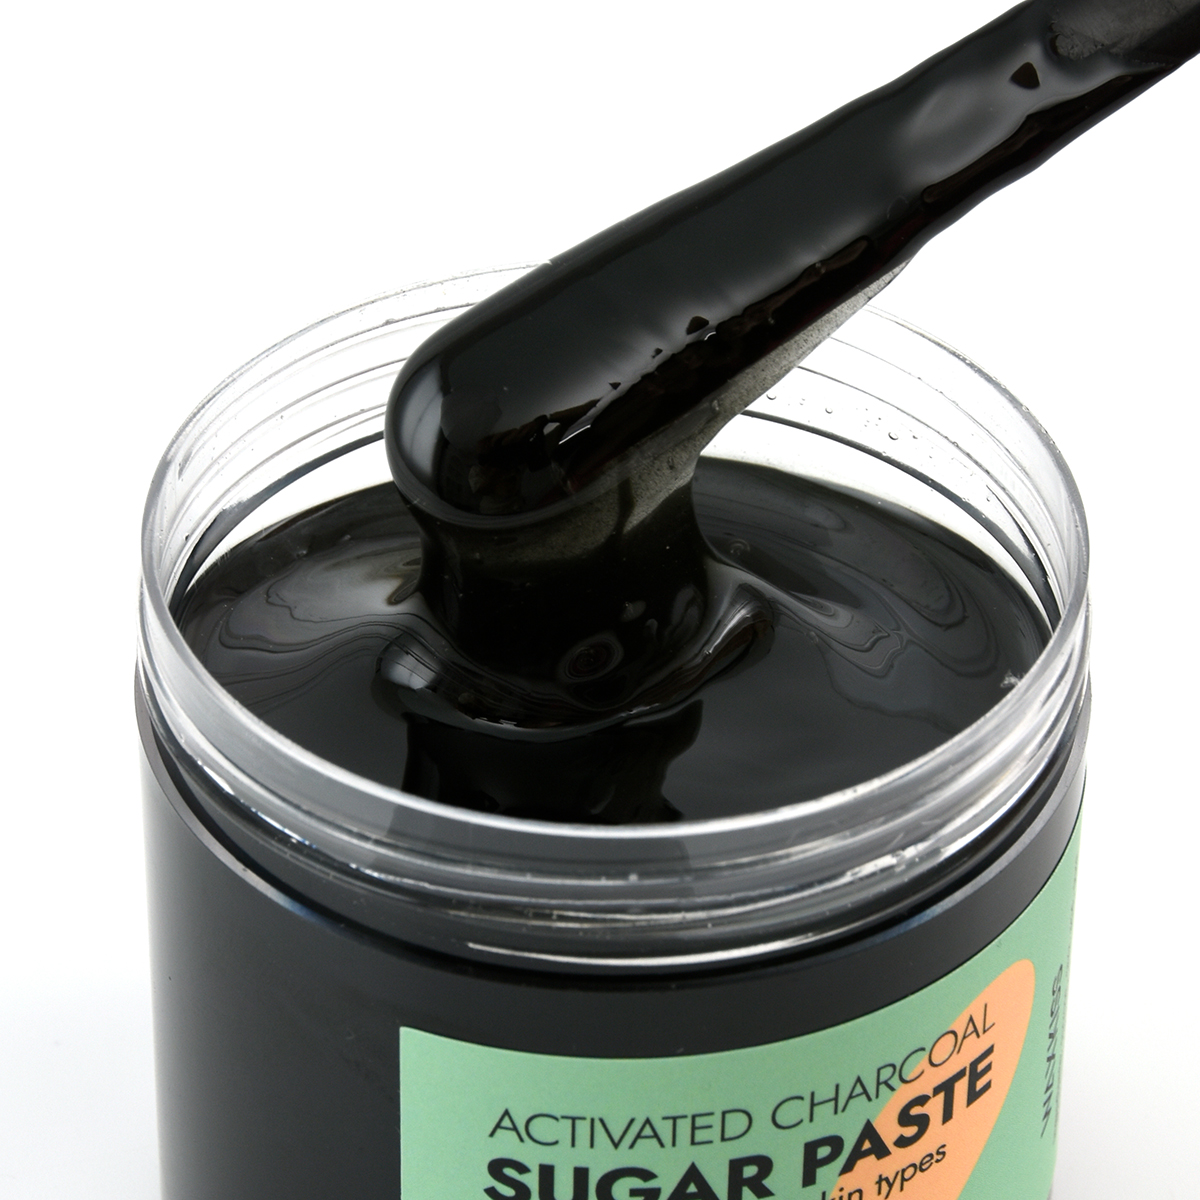 Activated Charcoal Sugar Wax 300G Black Sugar Pate Strong Adsorption Wax To Clean Skin